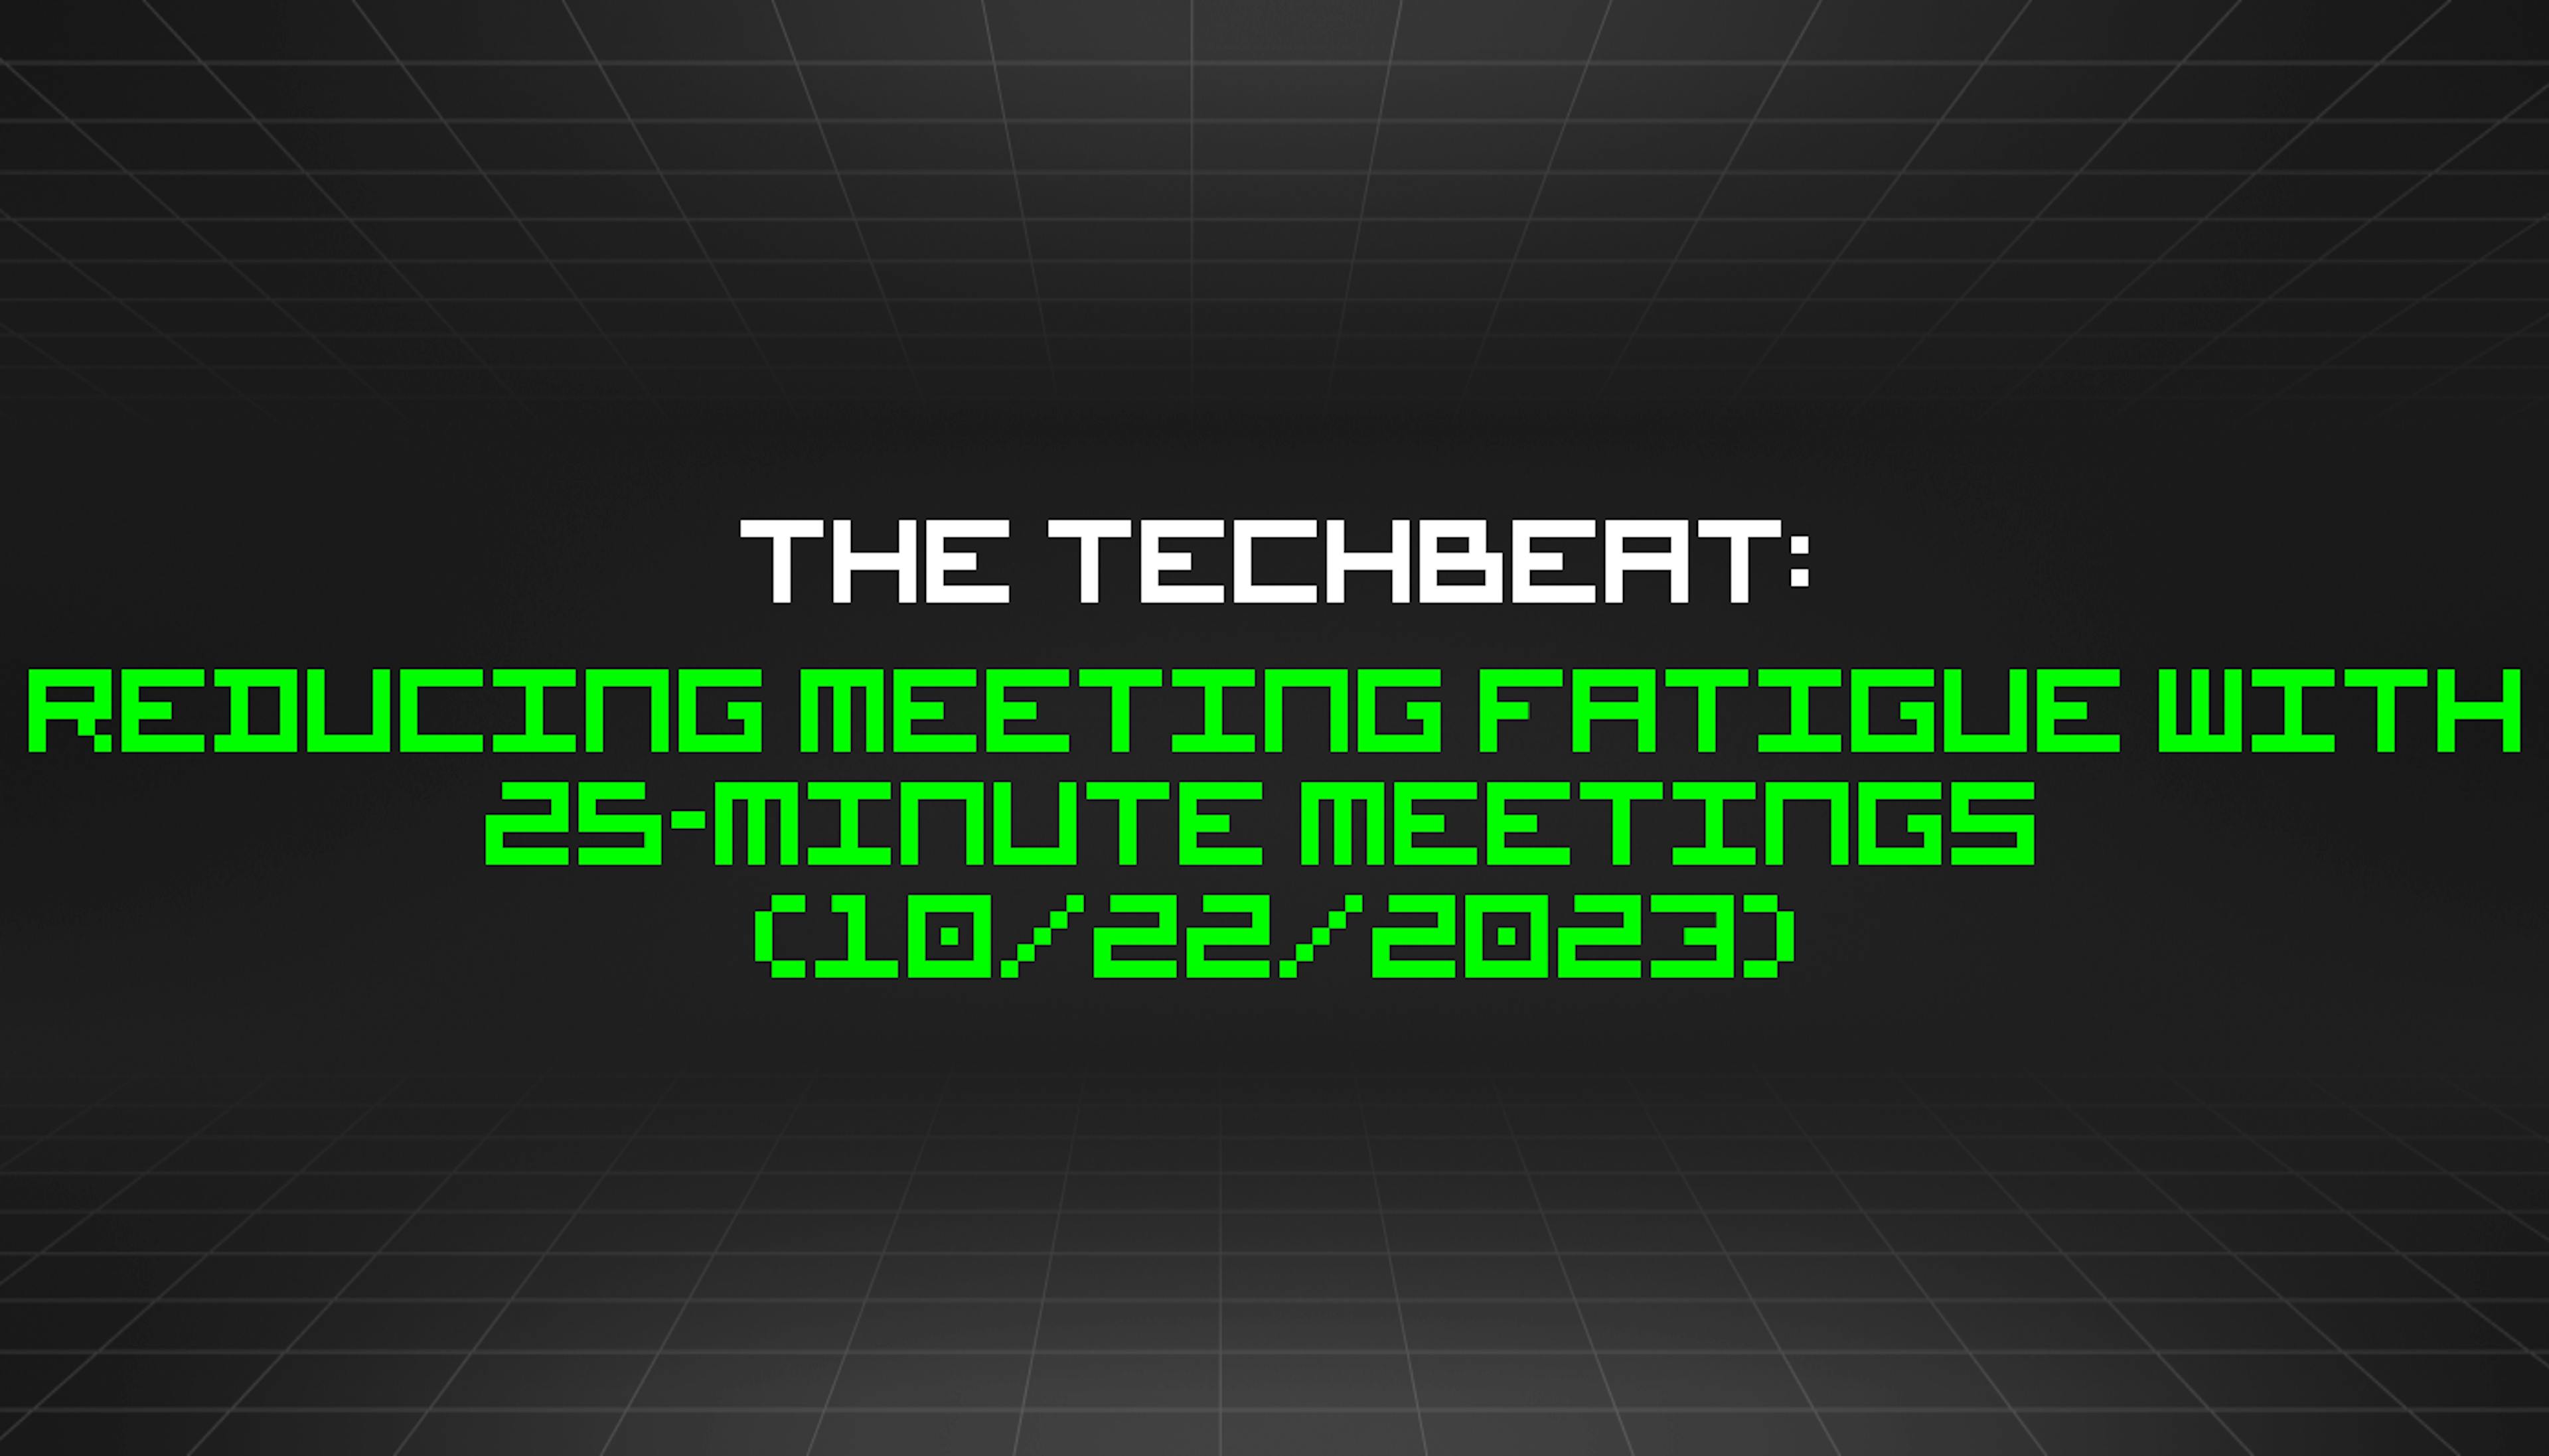 featured image - The TechBeat: Reducing Meeting Fatigue With 25-minute Meetings  (10/22/2023)